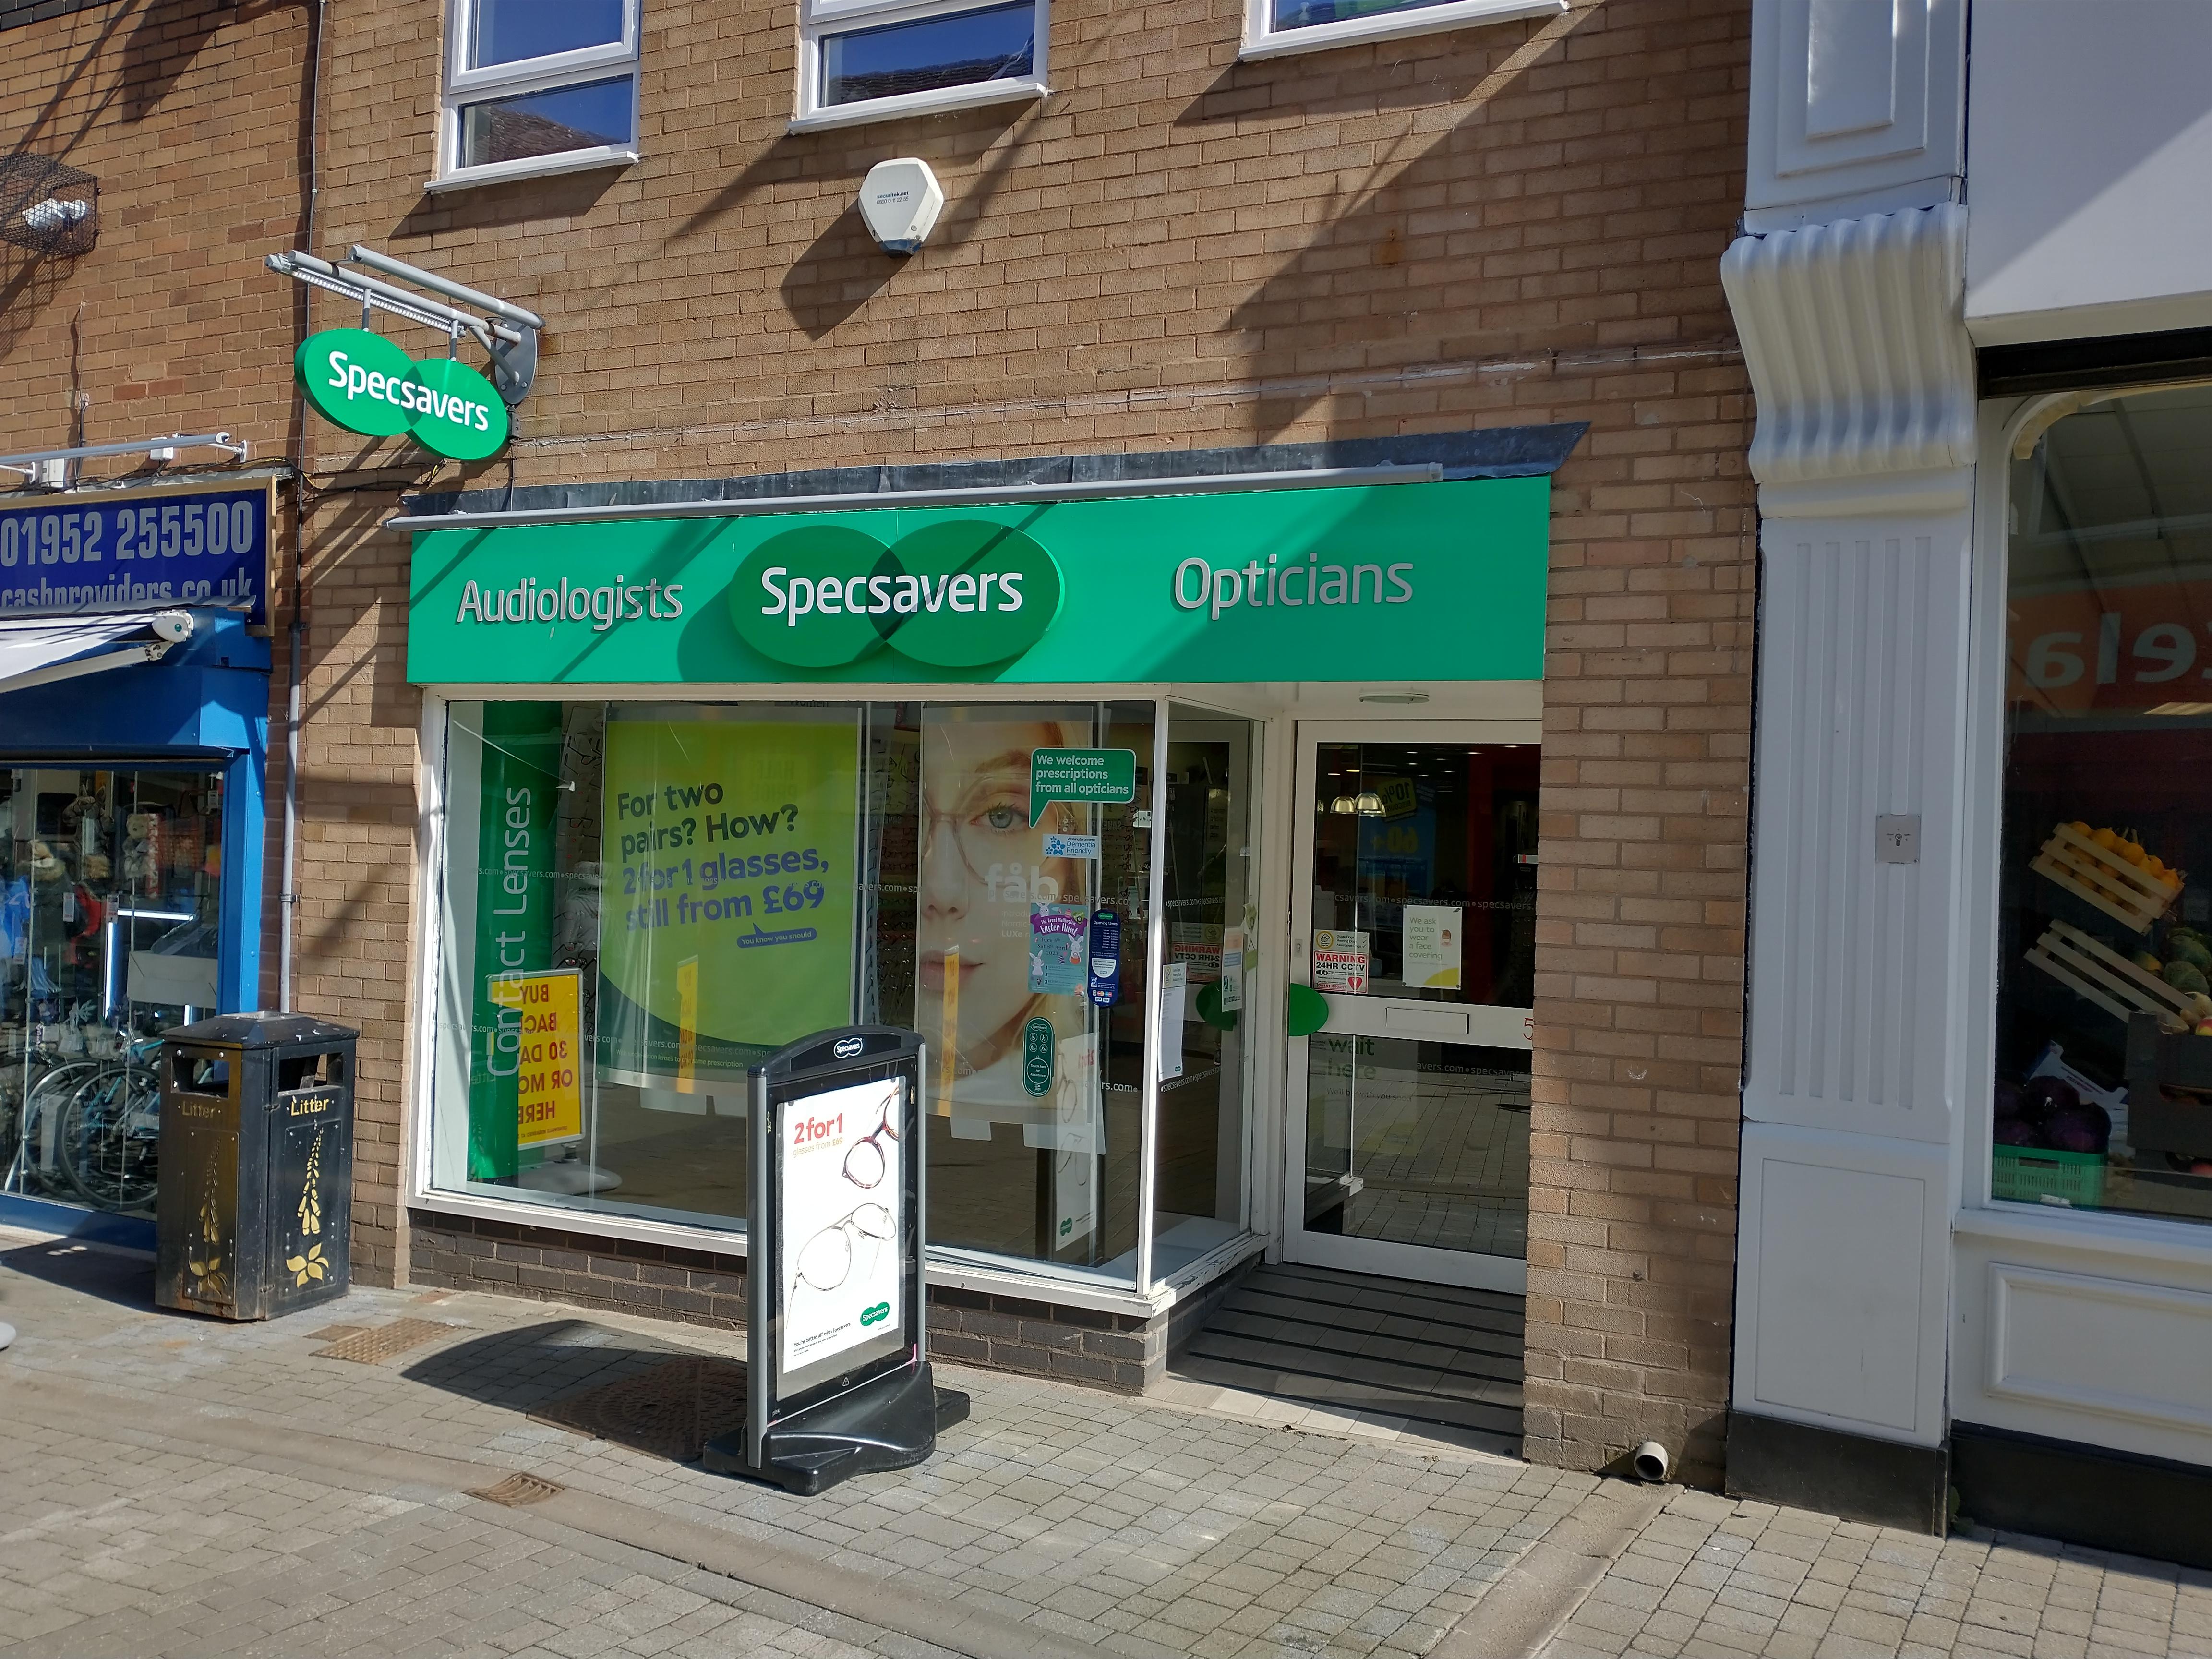 Images Specsavers Opticians and Audiologists - Wellington